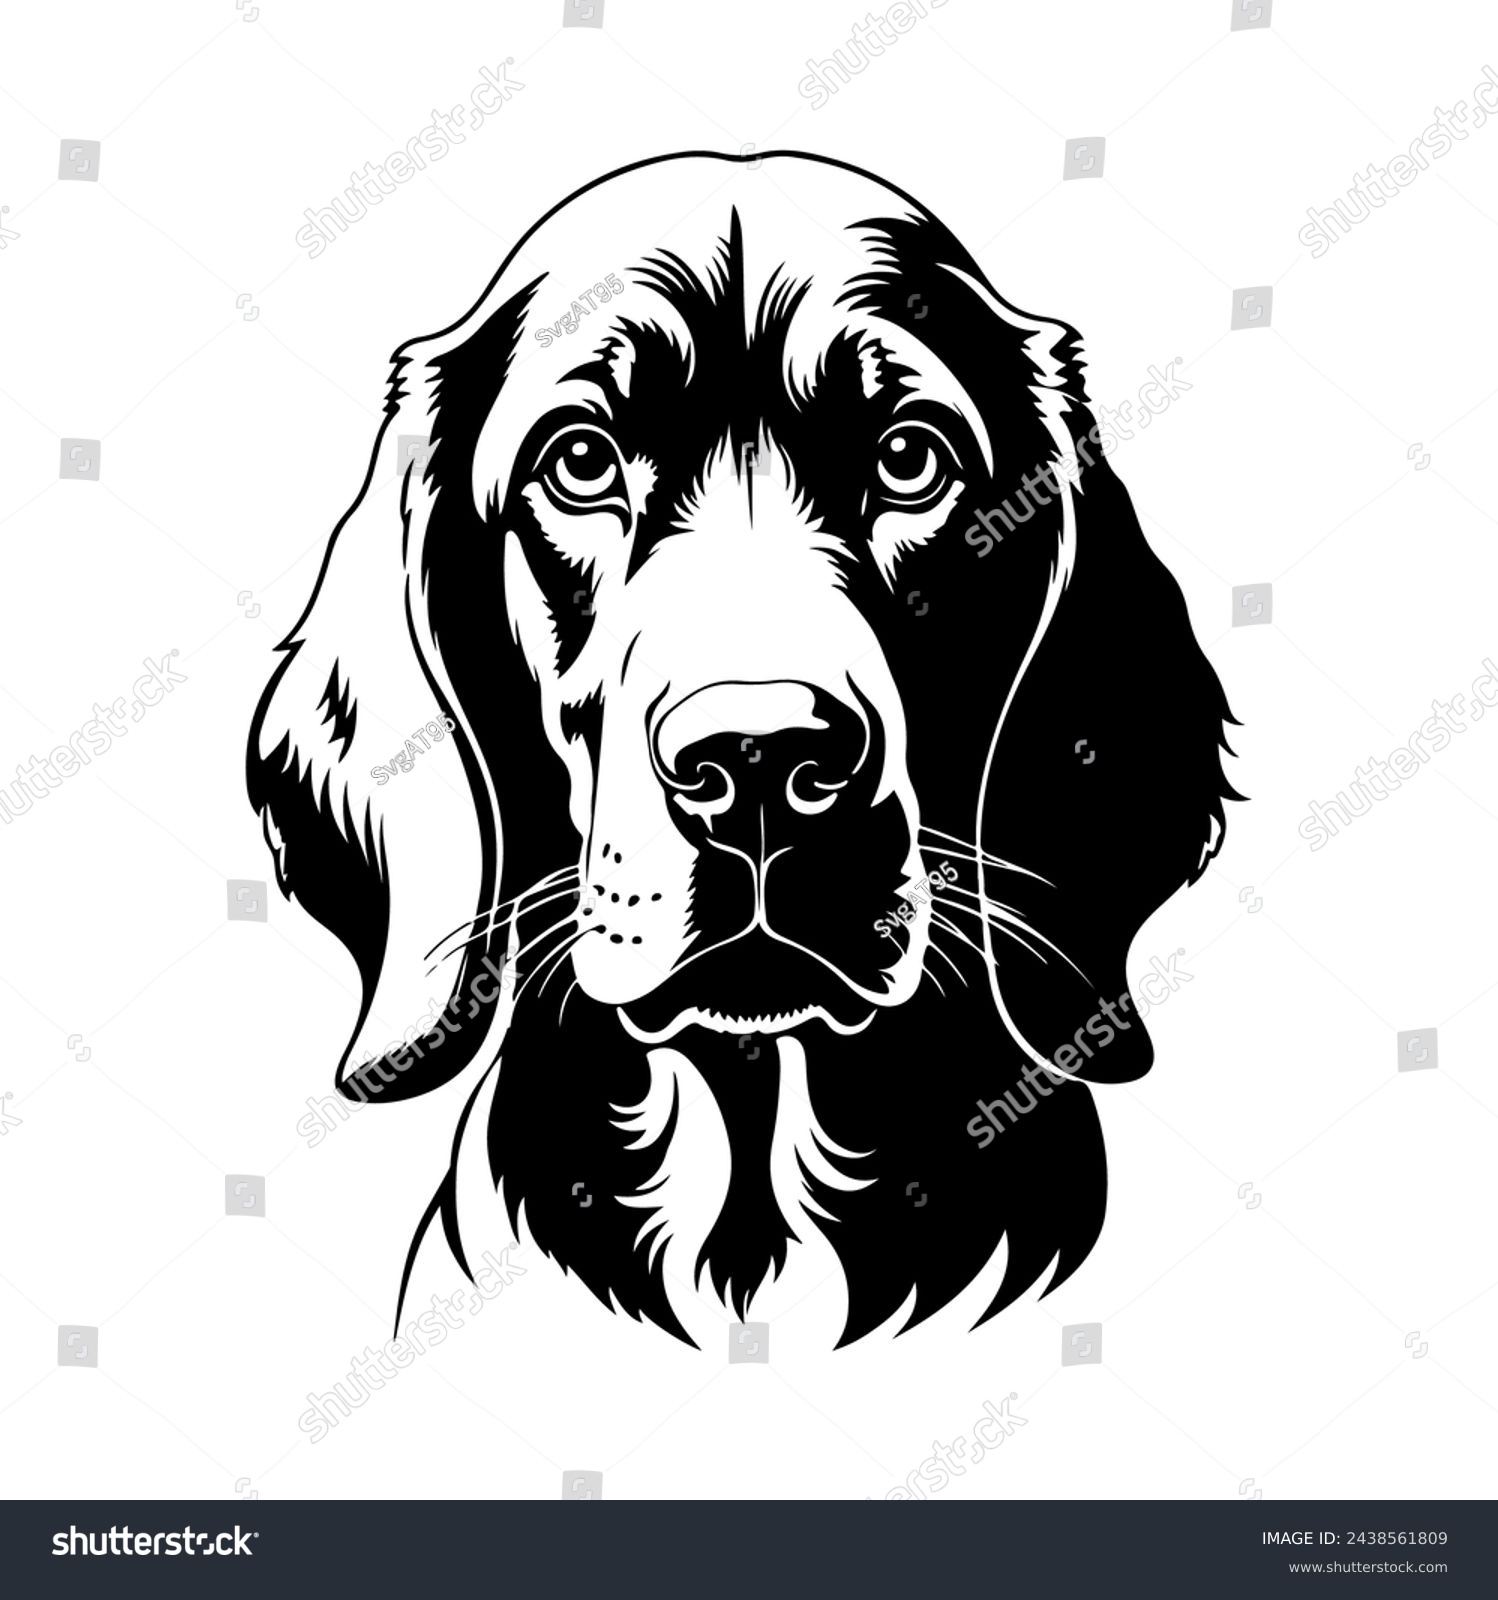 SVG of Portrait of a Bloodhound Dog Vector isolated on white background, Dog Silhouettes. svg